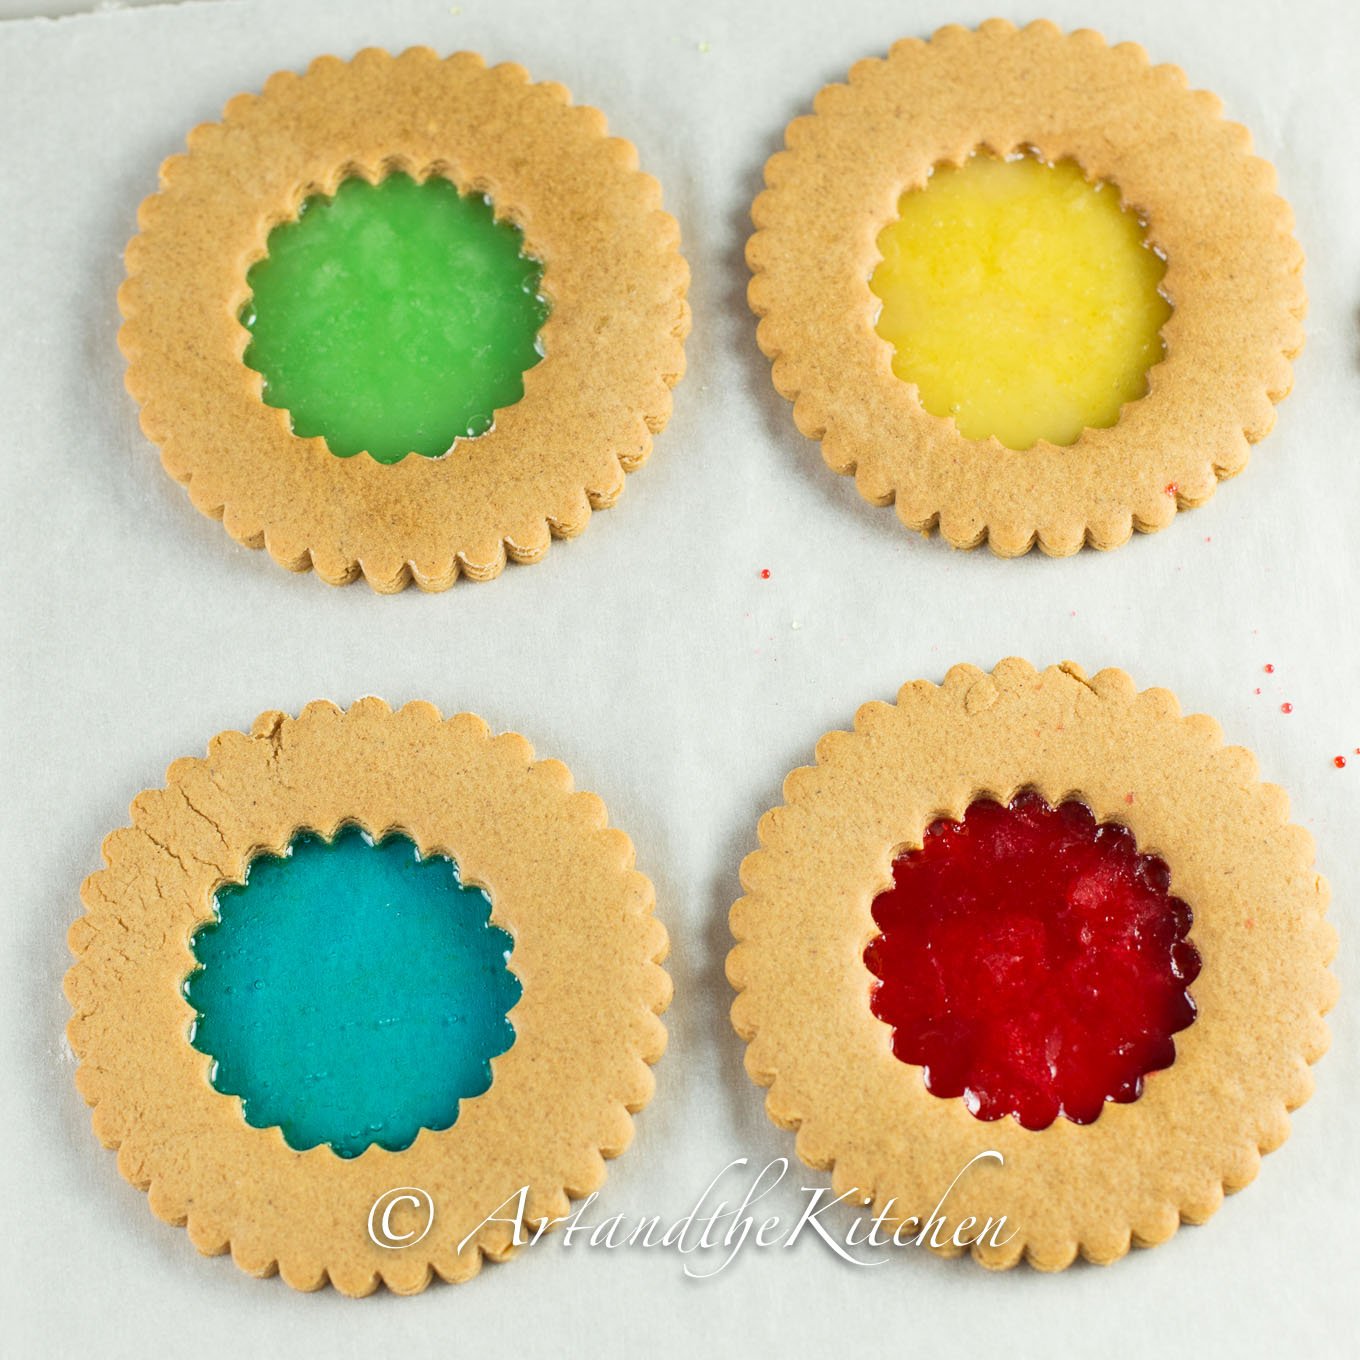 Four circle cookies with colourful stained glass looking centers.